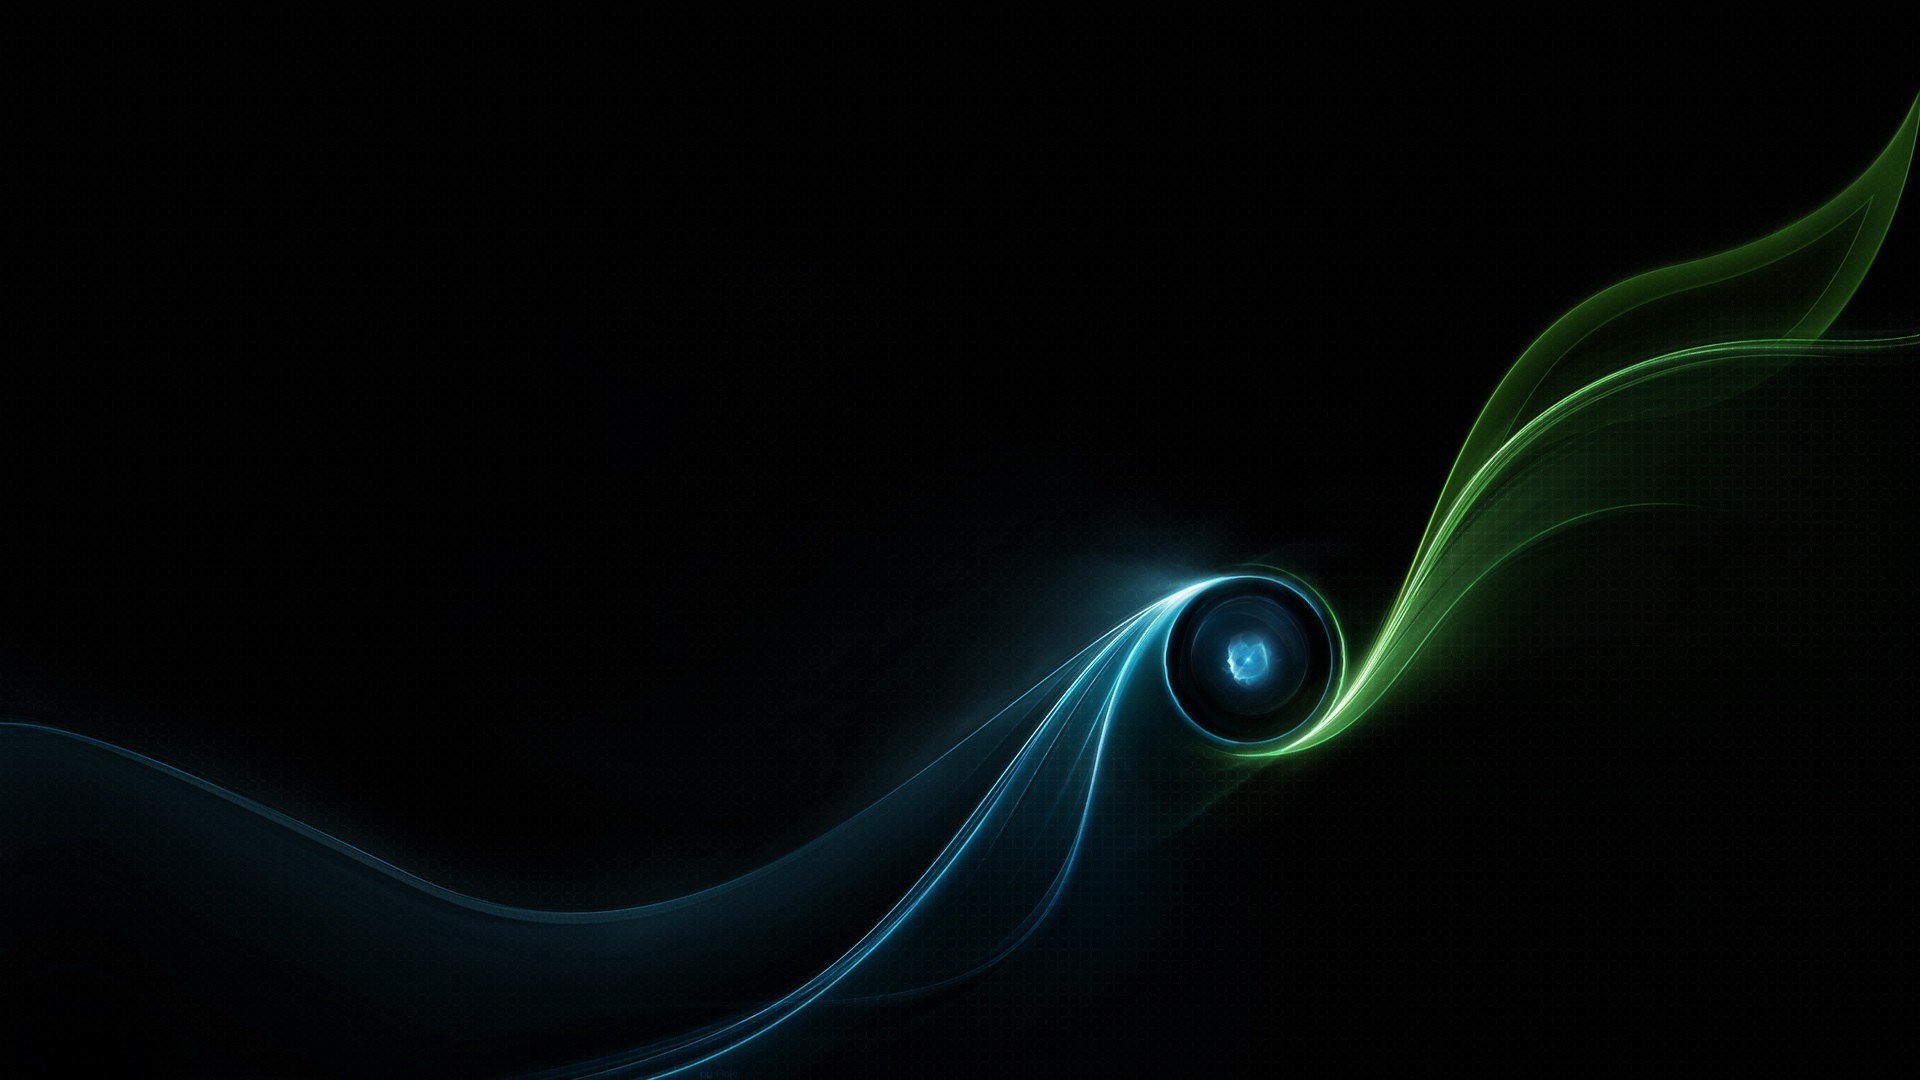 1920x1080 Hd Wallpapers Abstract Black 20 Cool Hd Wallpaper